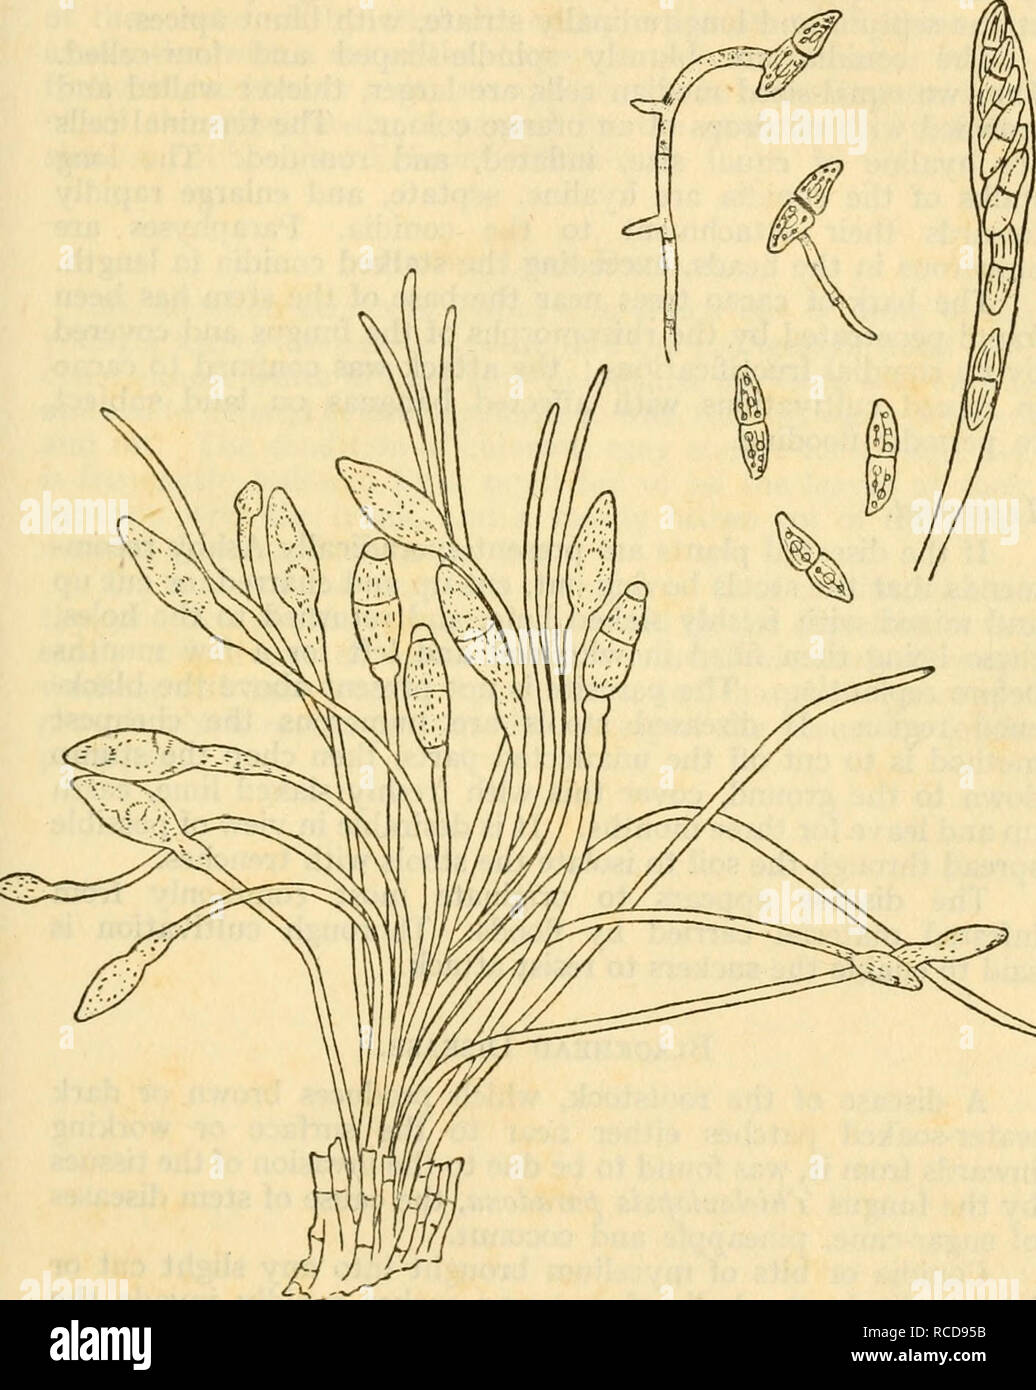 . Diseases of crop-plants in the Lesser Antilles. Tropical plants; Plant diseases. DISEASES OF BANANA 253 described as penetrating the tissue of the rootstock, and these in turn give out hyphae which grow among the cells. The fructifications are borne at or just above ground level.. Fig. 98 SpHAEROSTILBE MUSARUM, CONIDIA, ASCUS AND ASCOSPORES Bull. 6, Dept. Agri., Jamaica The conidial stage occurs on small yellow or orange cushions up to 2 mm. diameter, bearing one or more slender white stalks furnished with a brown or brownish red spherical head or ending in a point.. Please note that these i Stock Photo